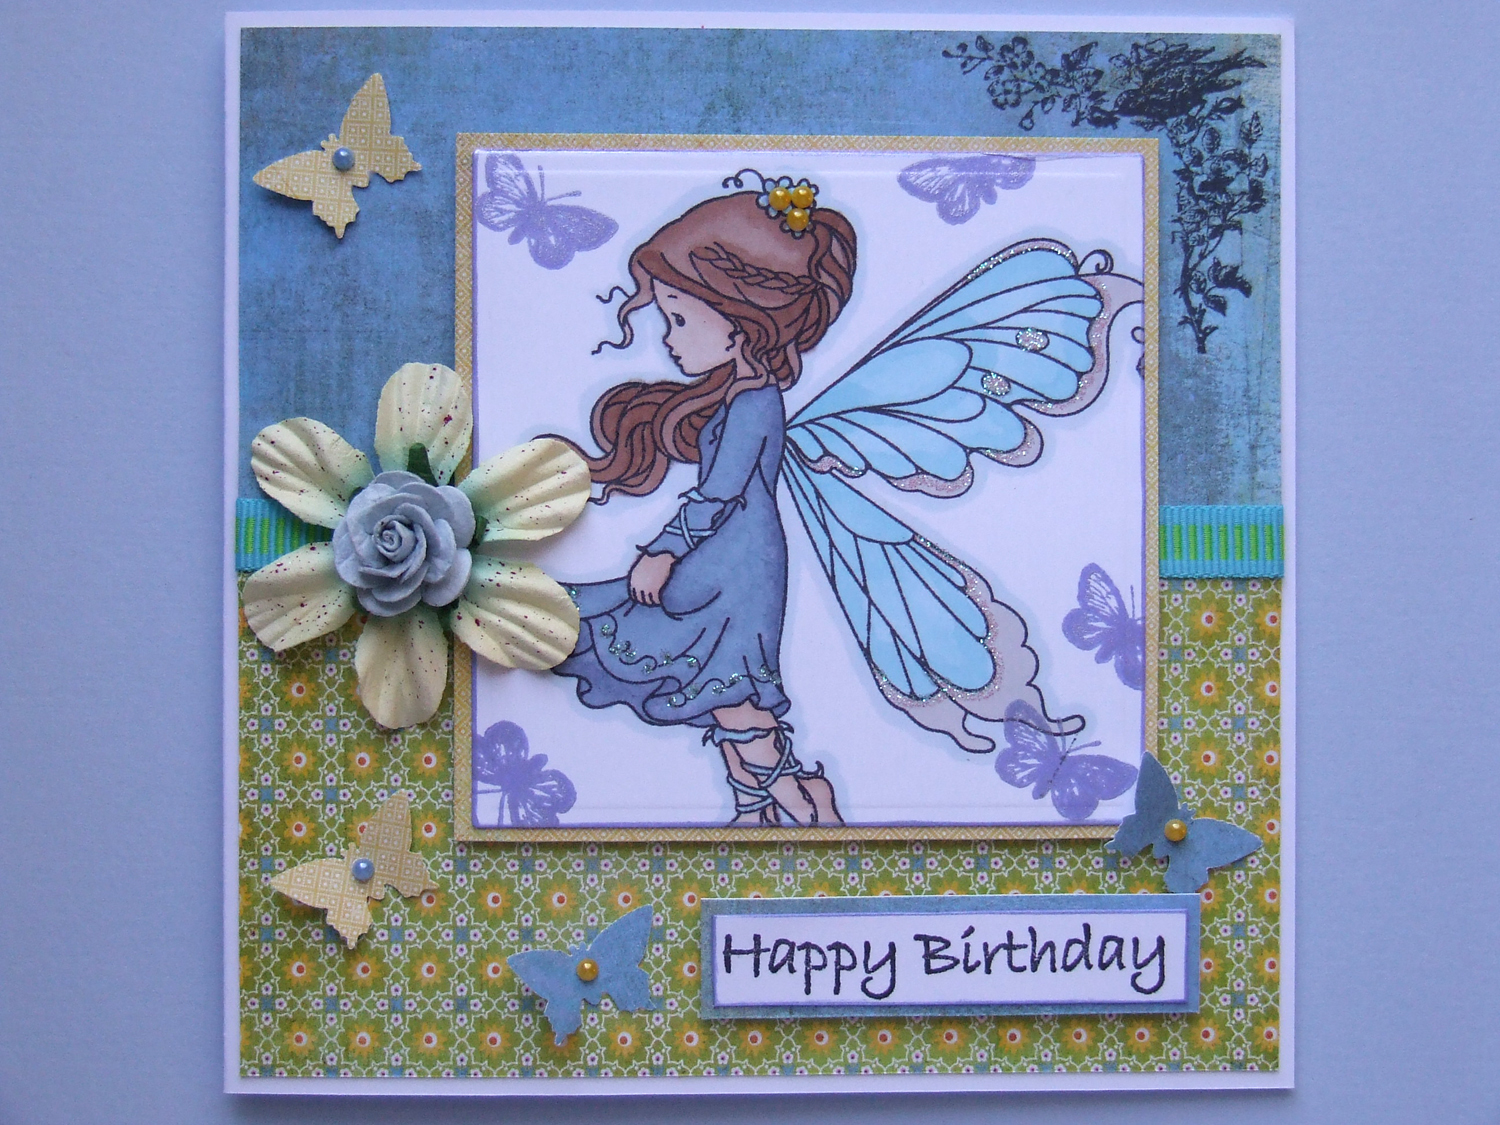 laughing-ducks-whimsy-silver-fairy-stamped-birthday-card